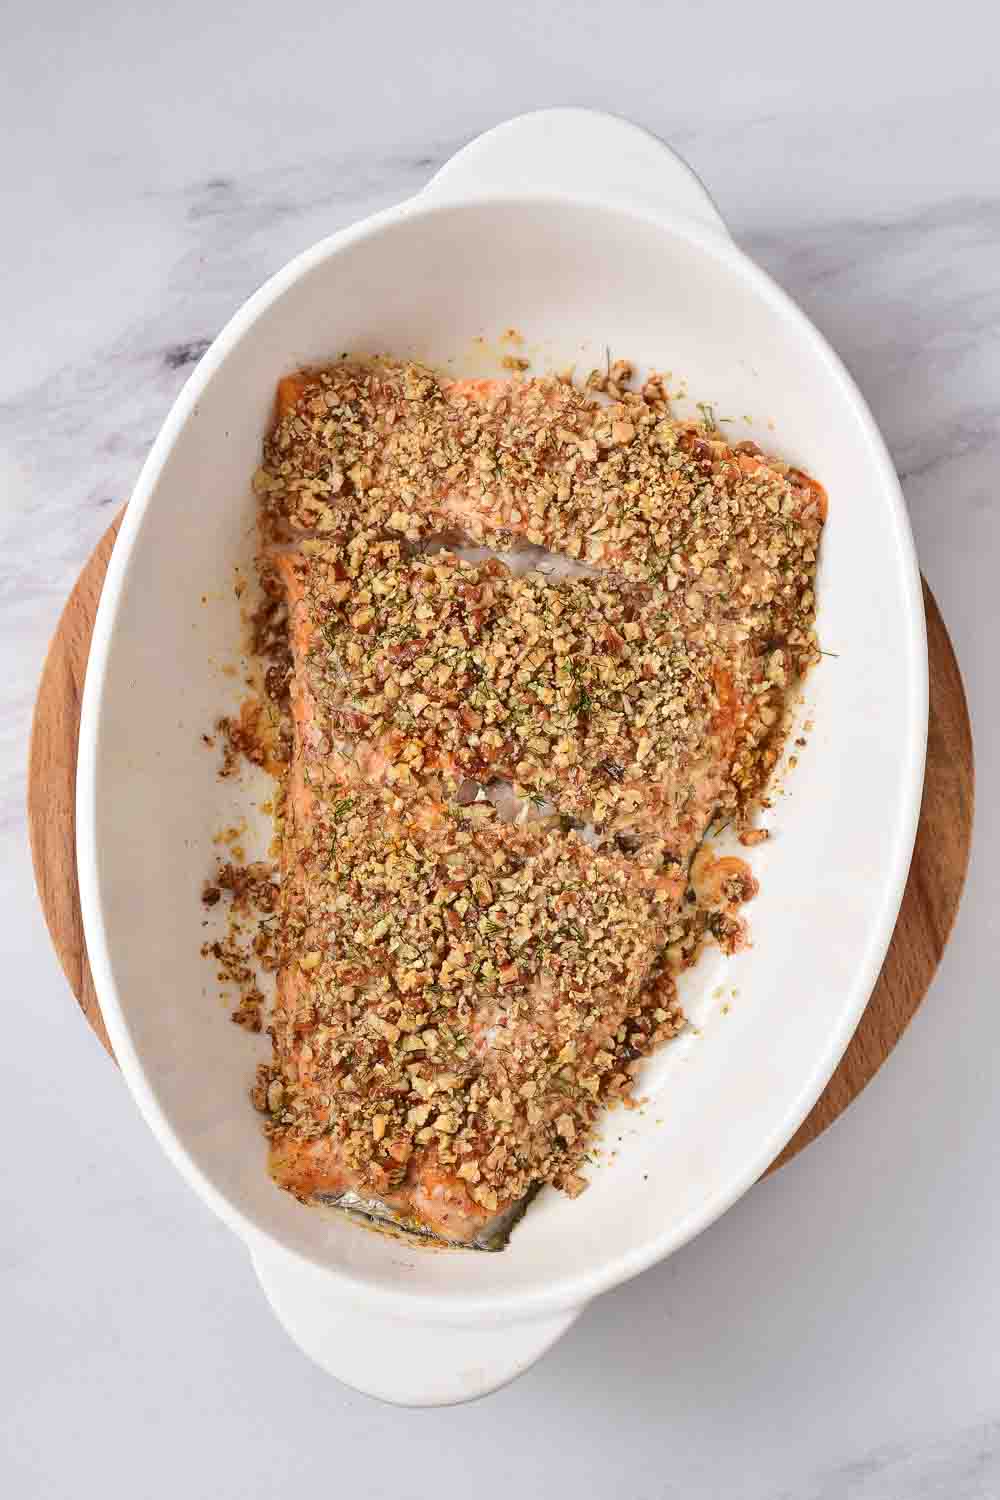 Whether you’re looking for a quick and easy weeknight dinner or a fancy weekend meal, this easy pecan-crusted salmon is a delicious, high-protein recipe that is also perfect for meal prep.